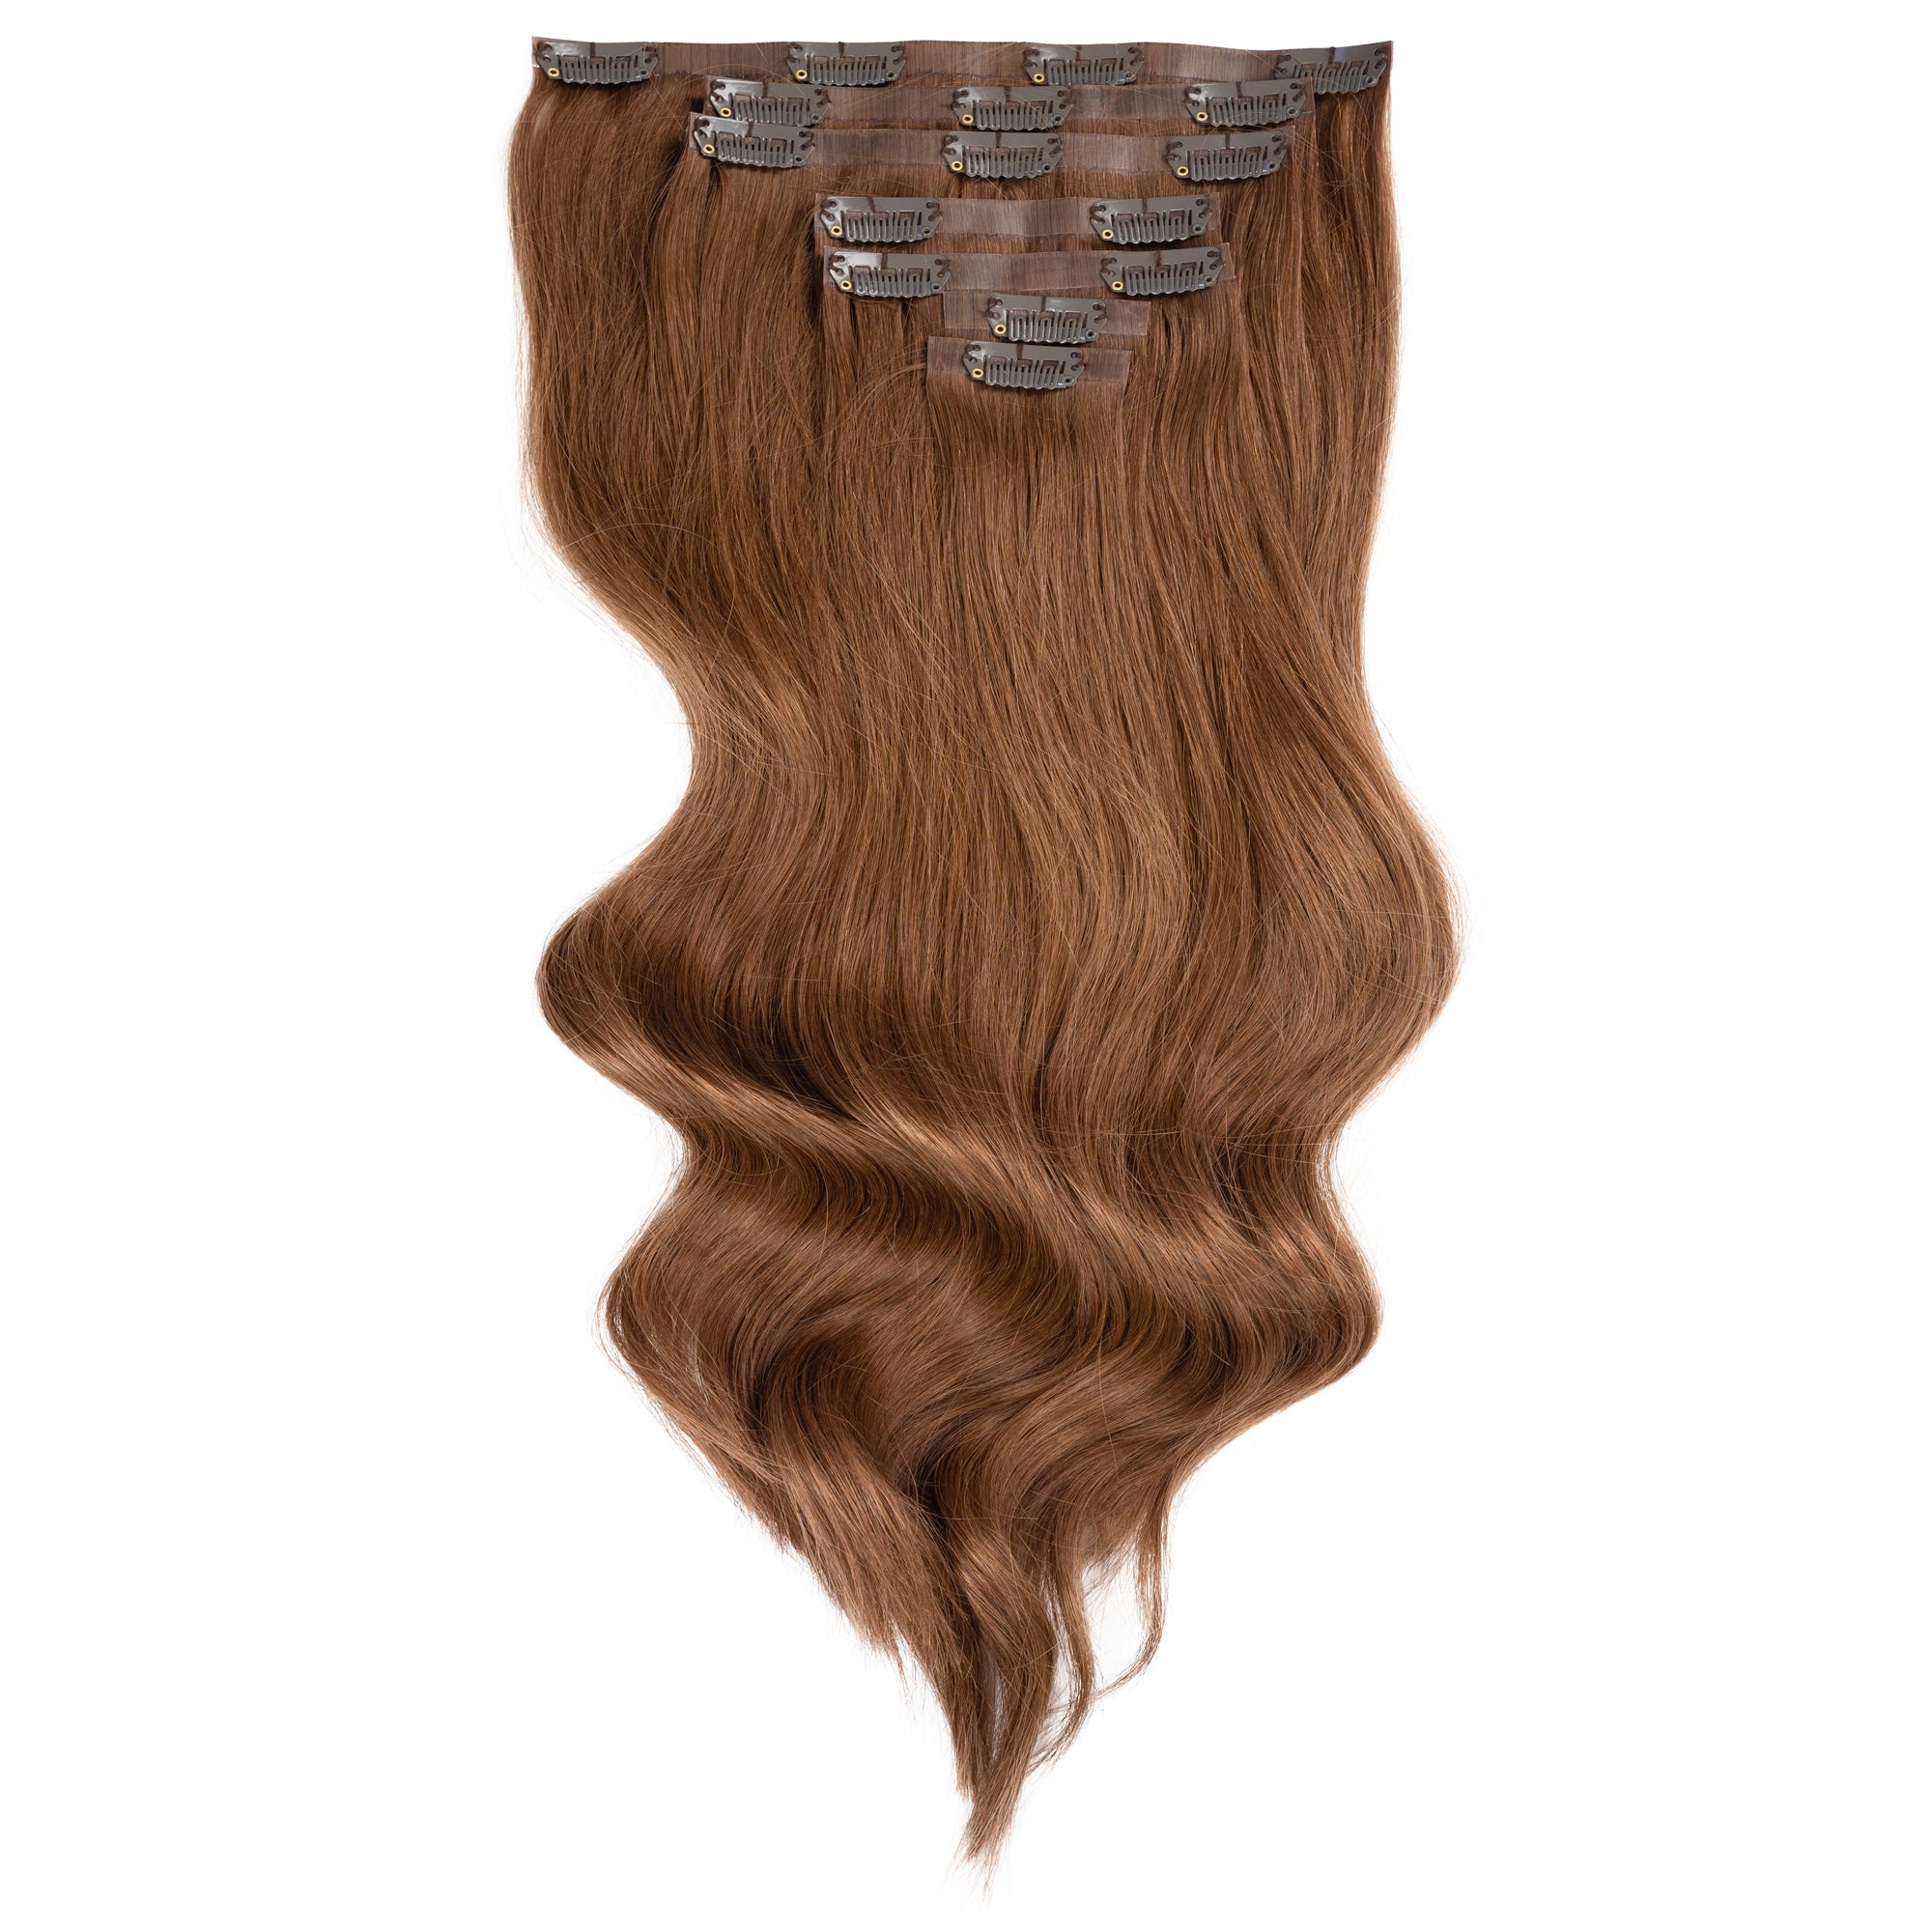 Duchess Elegant Clip-in Hair Extensions 14" Colour 5 Light Brown - Maneology Hair Extensions